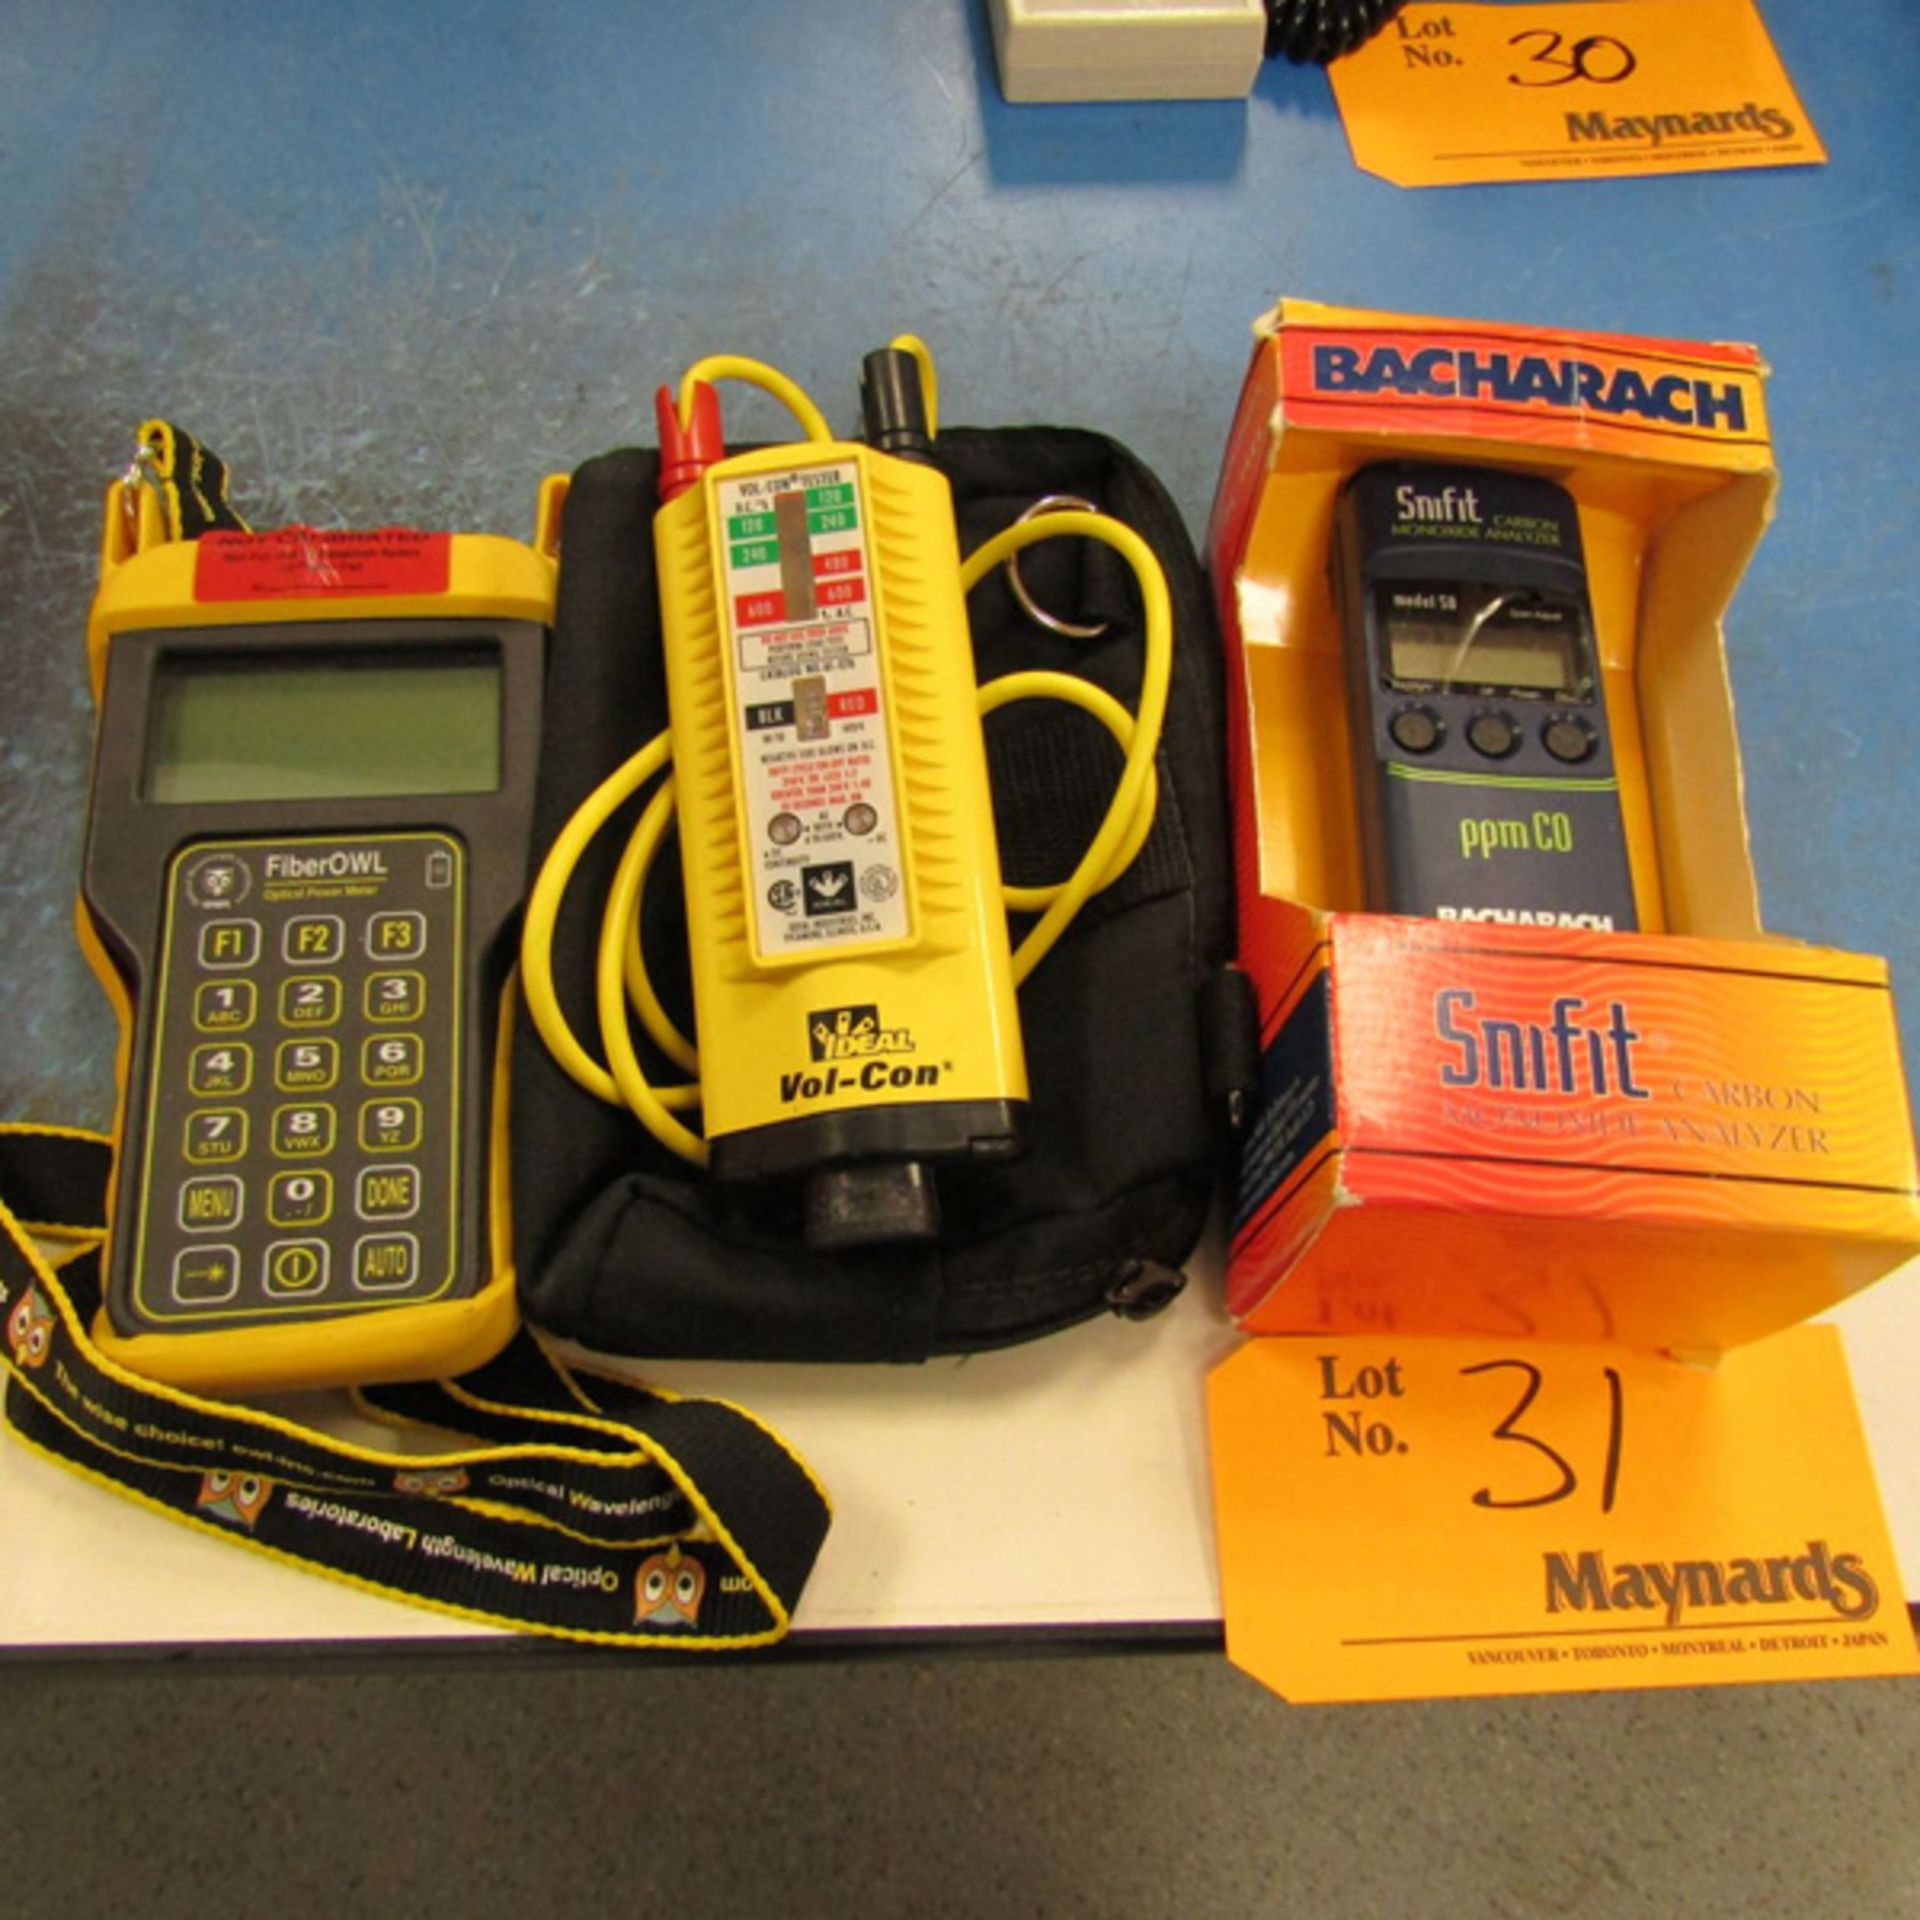 Lot of Inspection Equipment to Include (1) Bacharach Snifit Carbon Monoxide Analyzer, (1) Ideal